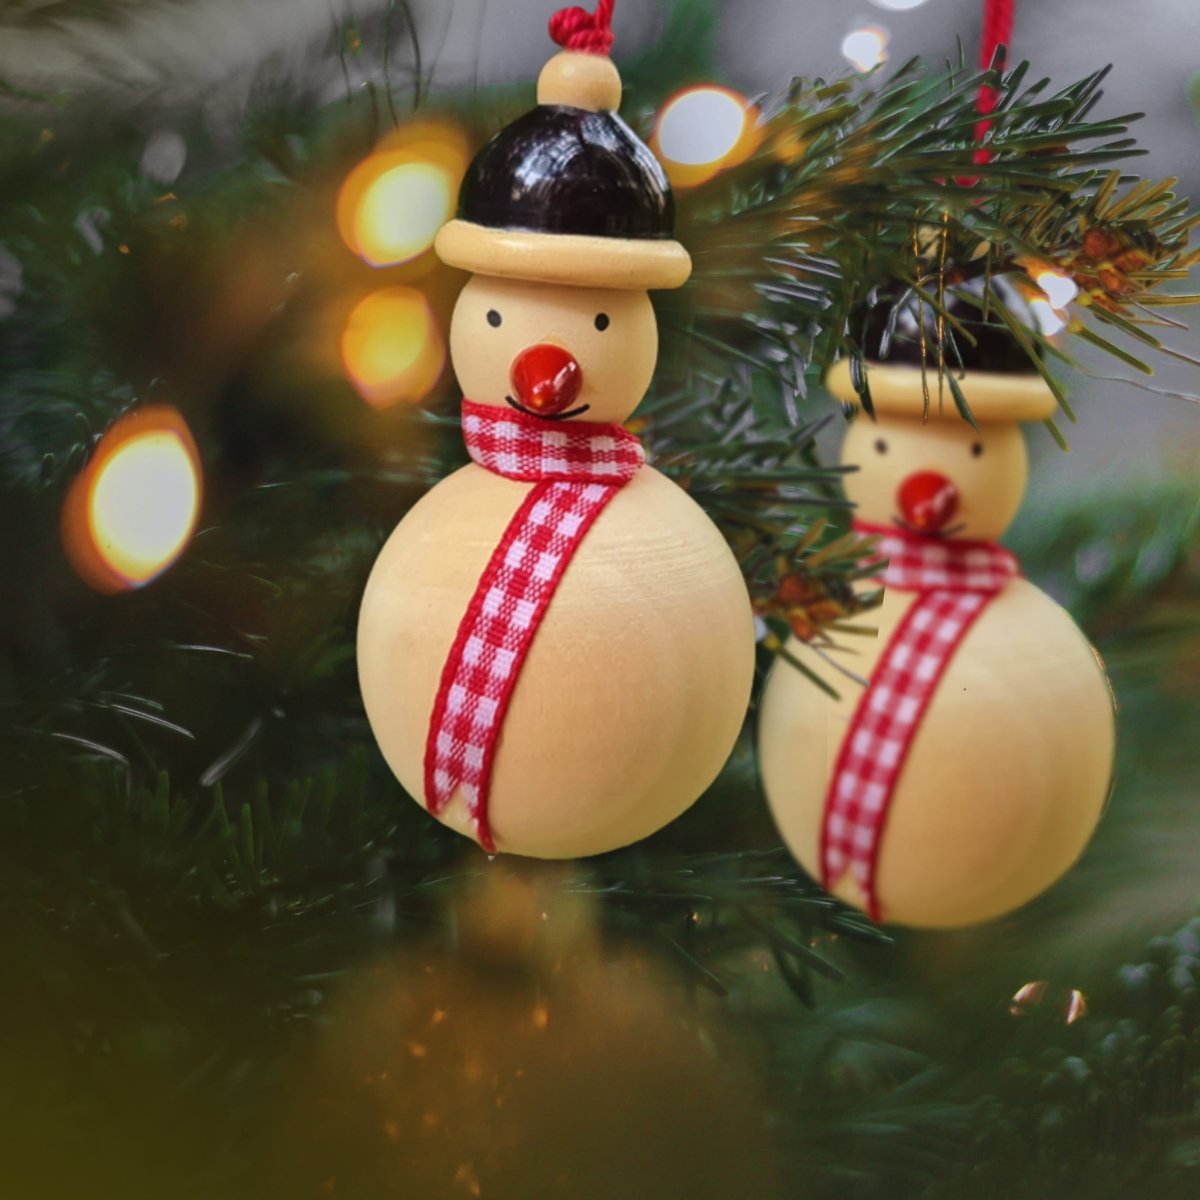 Wooden Christmas Tree Ornaments, Set of 2